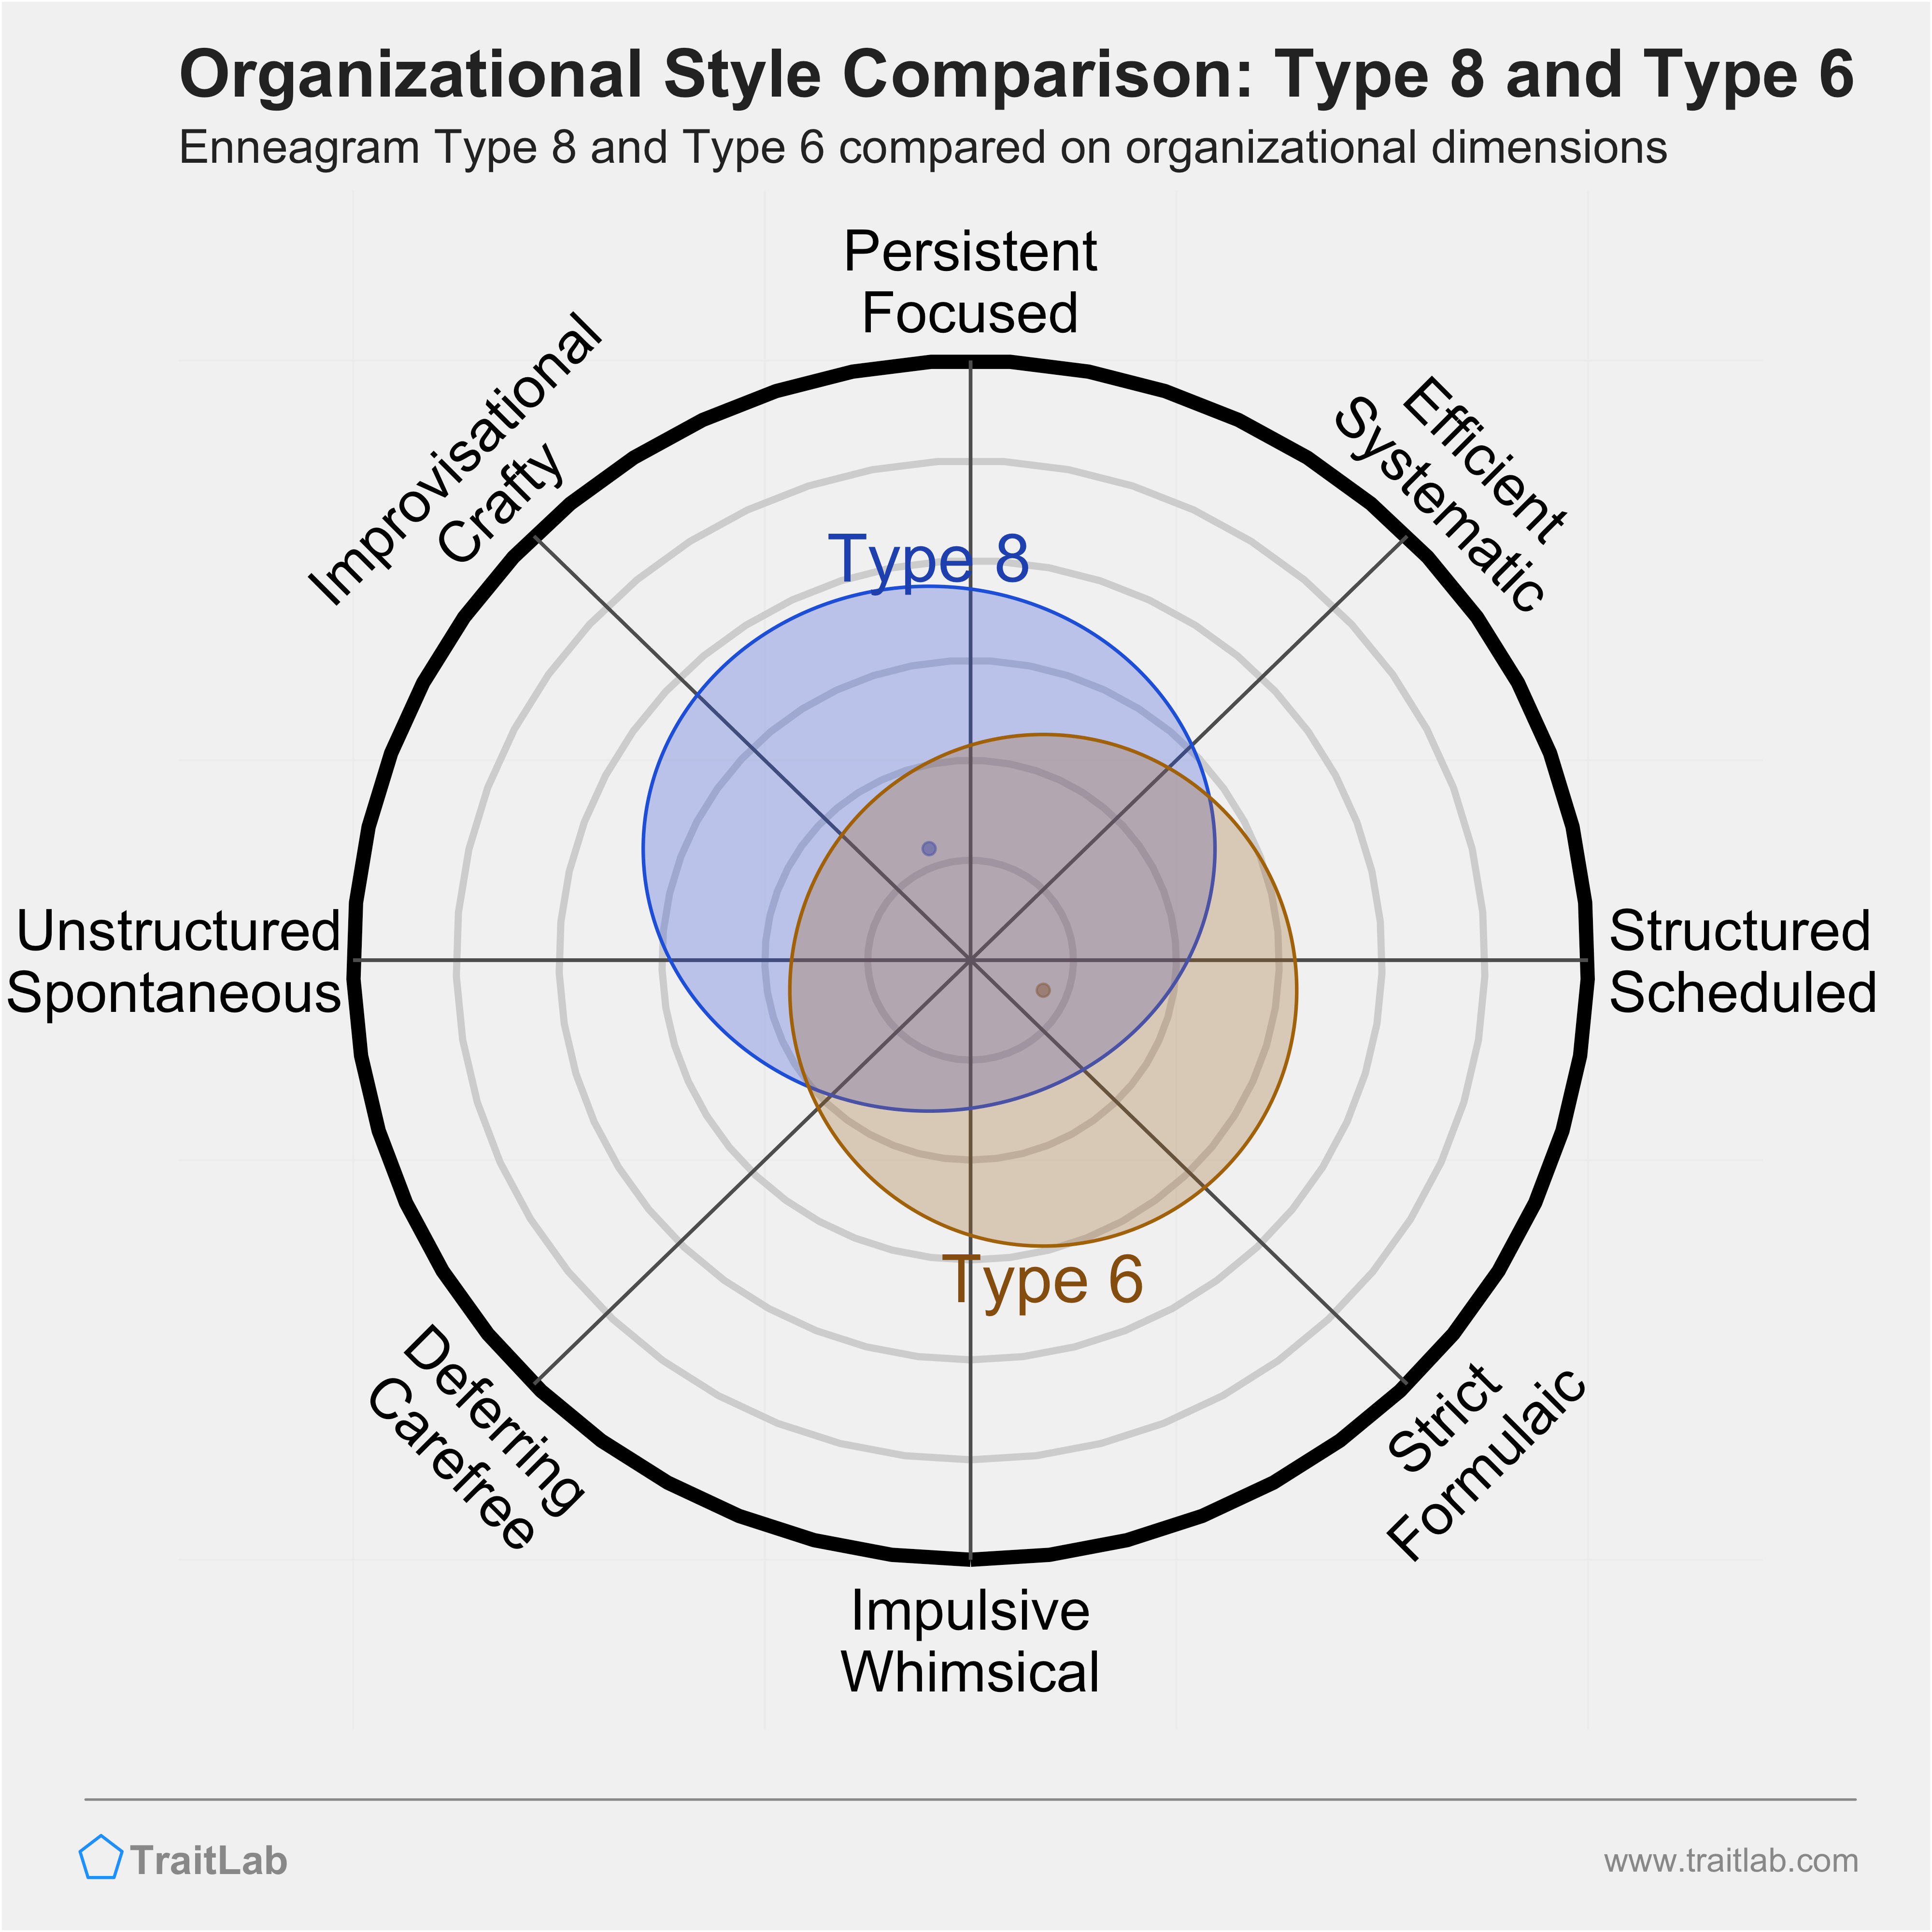 Type 8 and Type 6 comparison across organizational dimensions